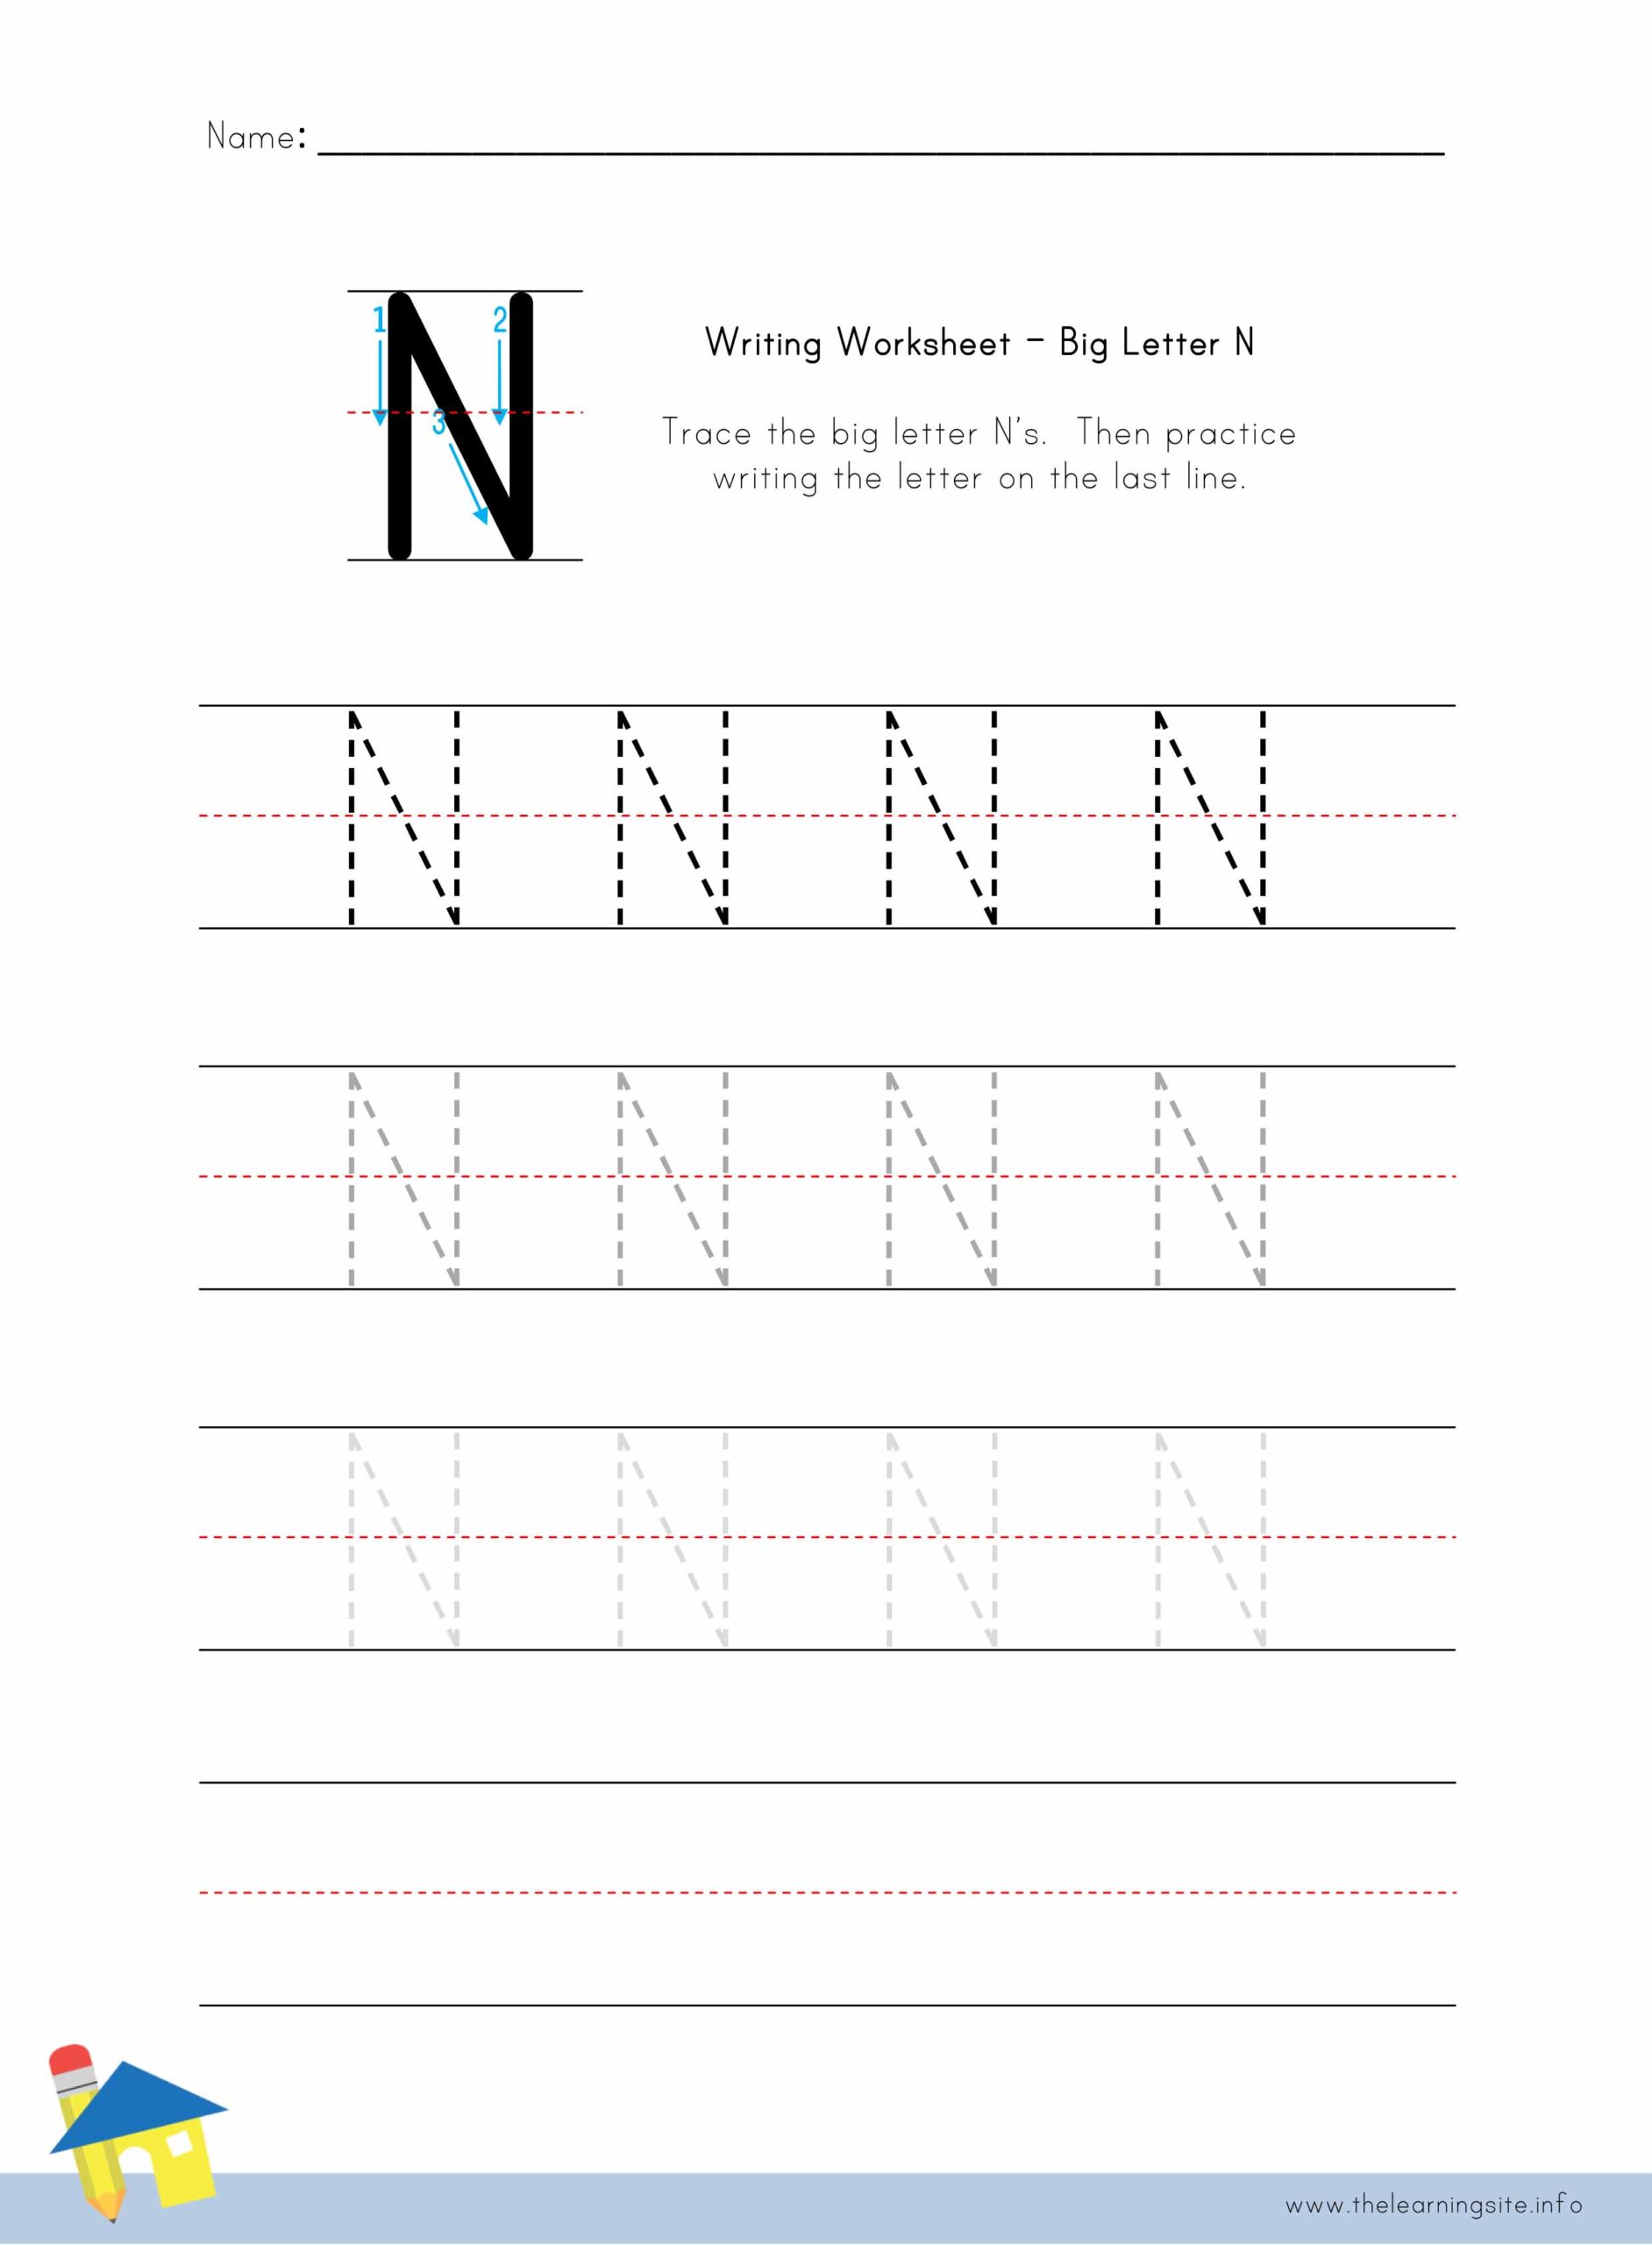 big-letter-n-writing-worksheet-the-learning-site